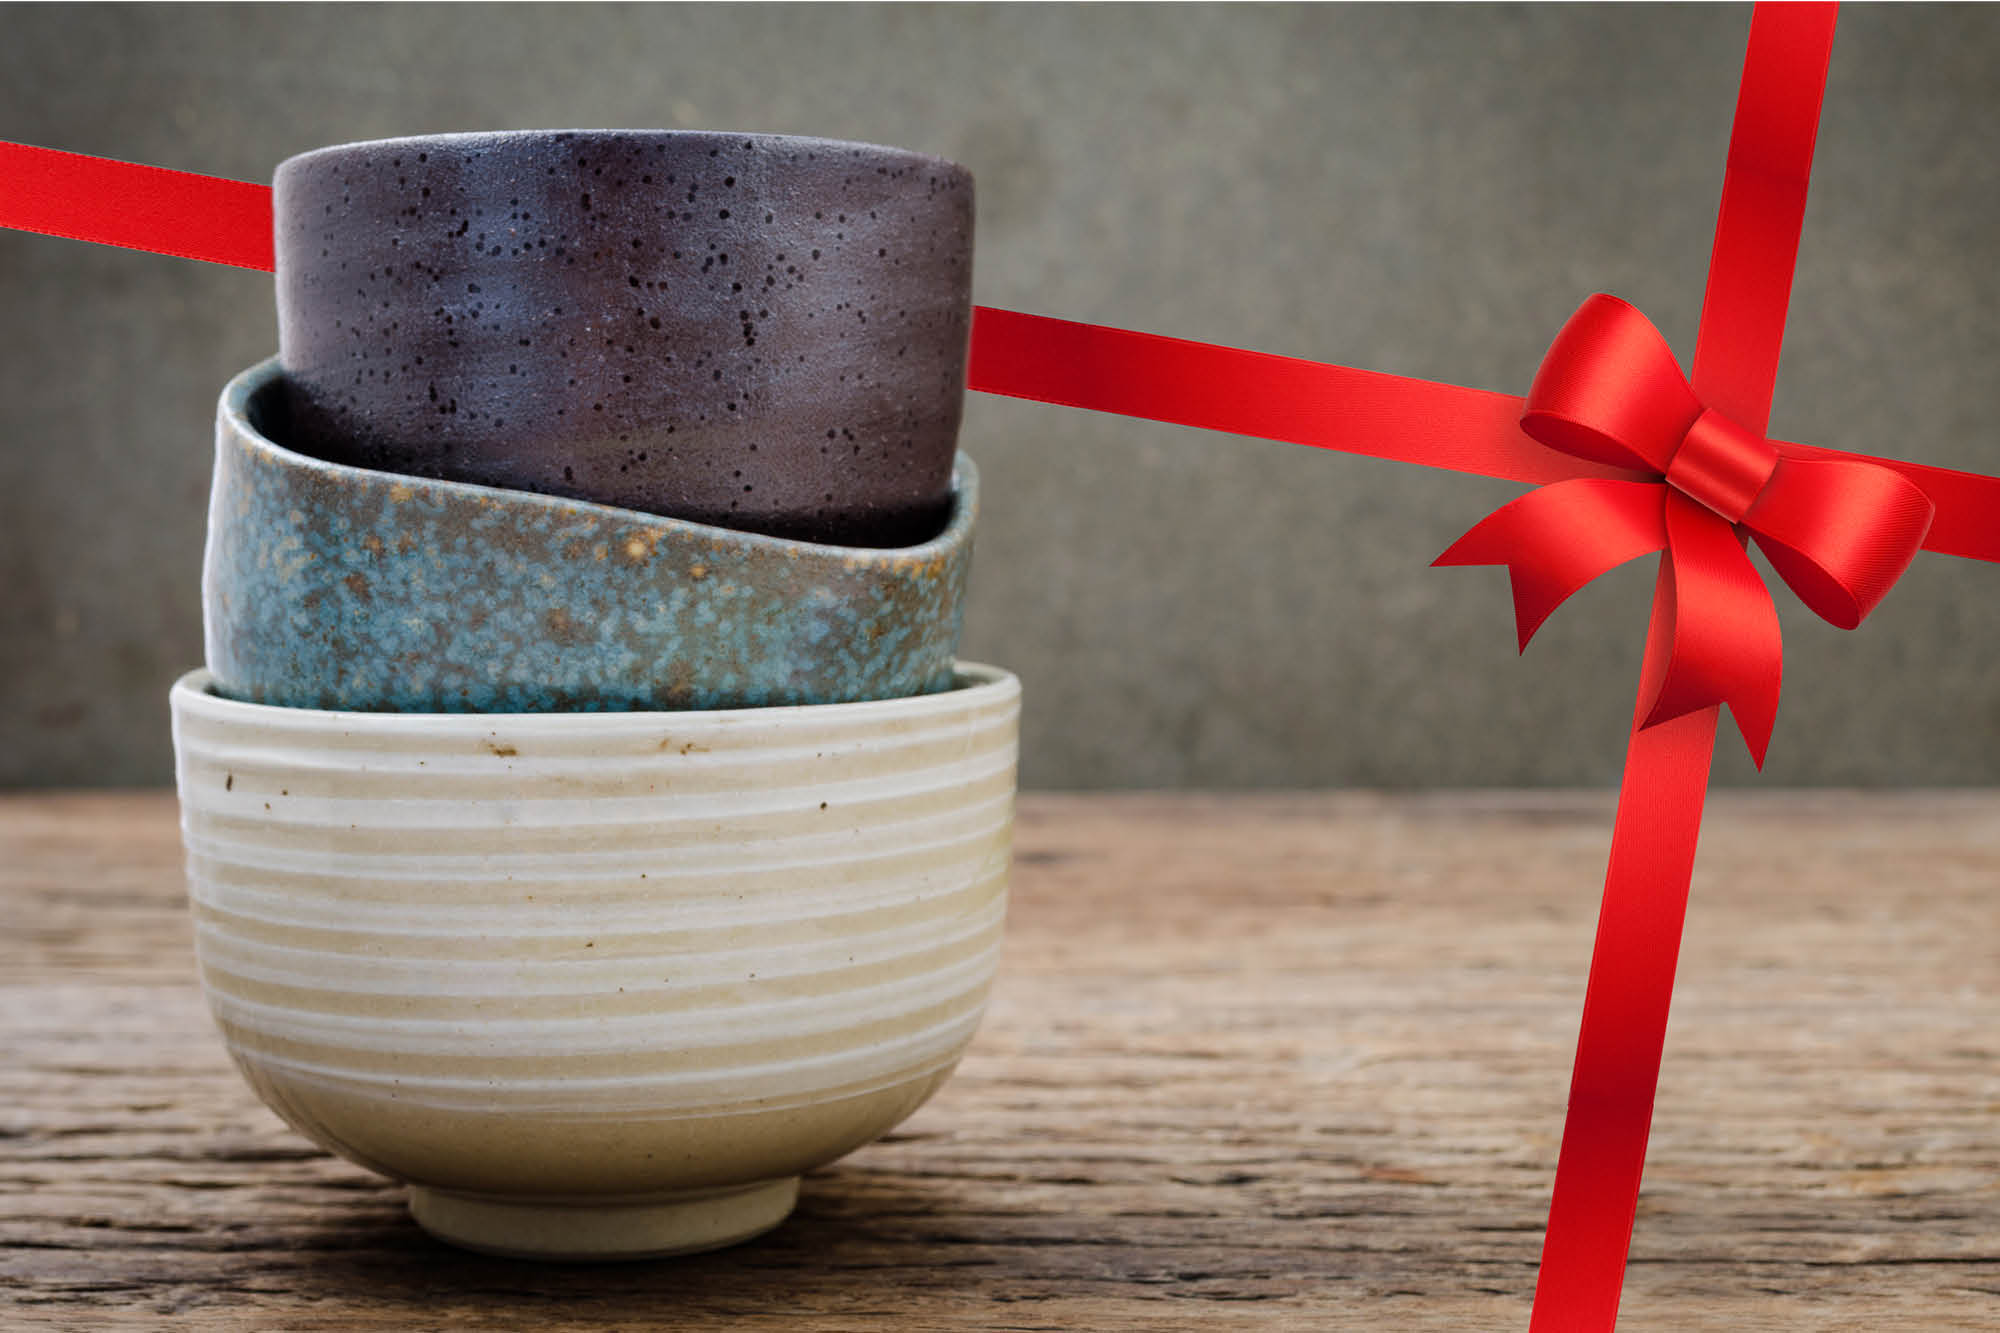 Photo of ceramic bowls with a red bow in the background.